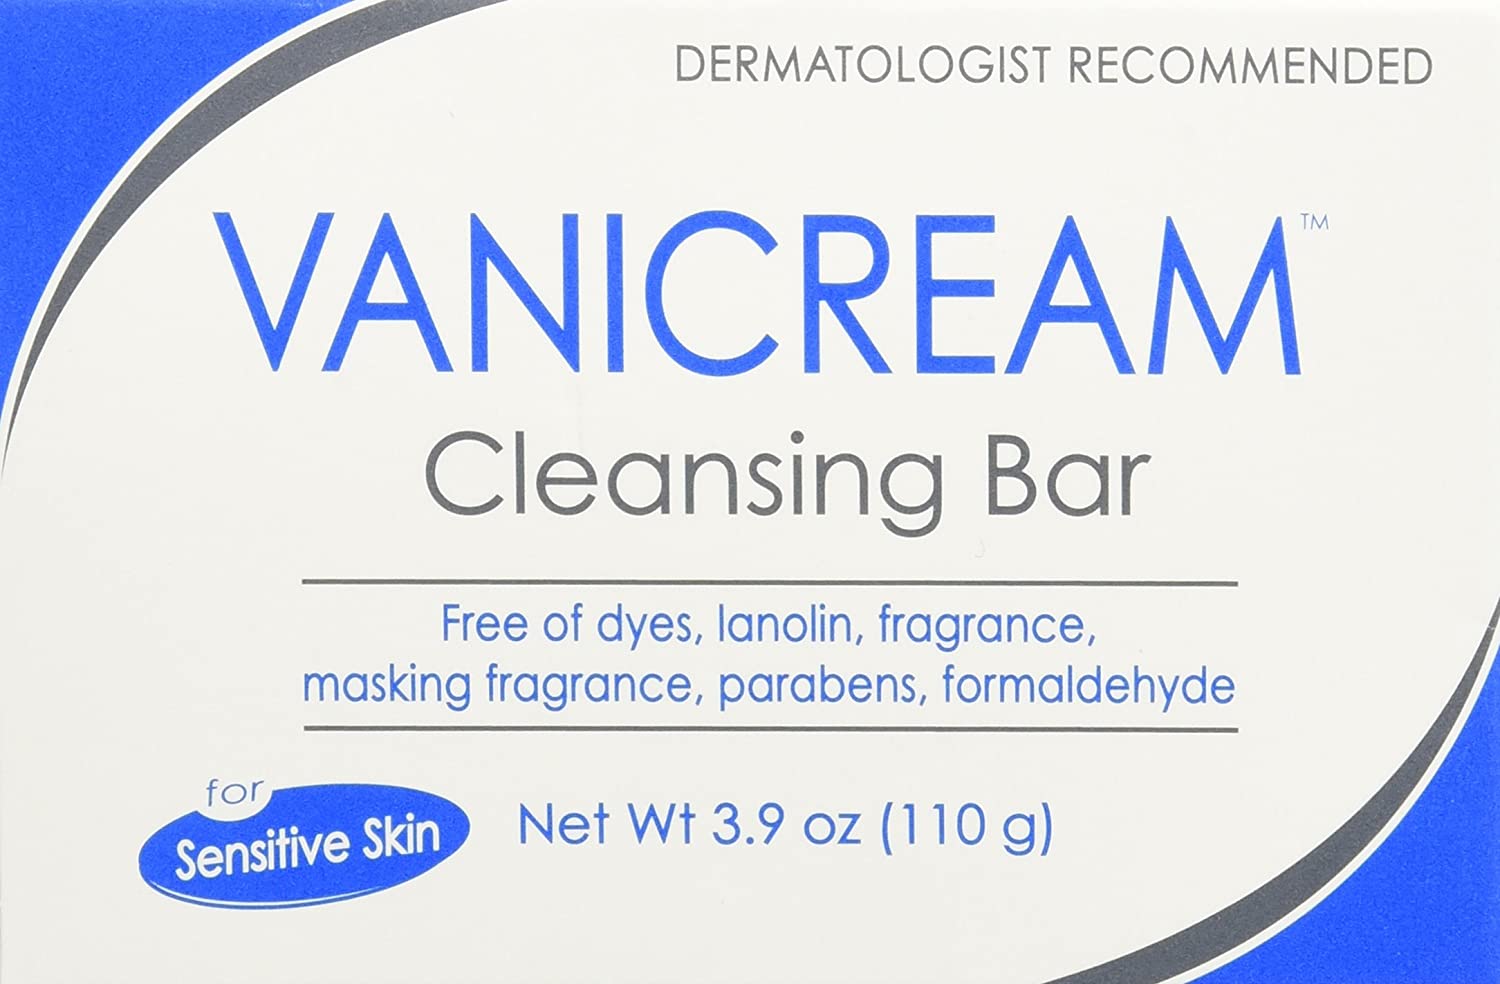 Vanicream Cleansing Bar, Fragrance Free Pick Up In TODAY CVS